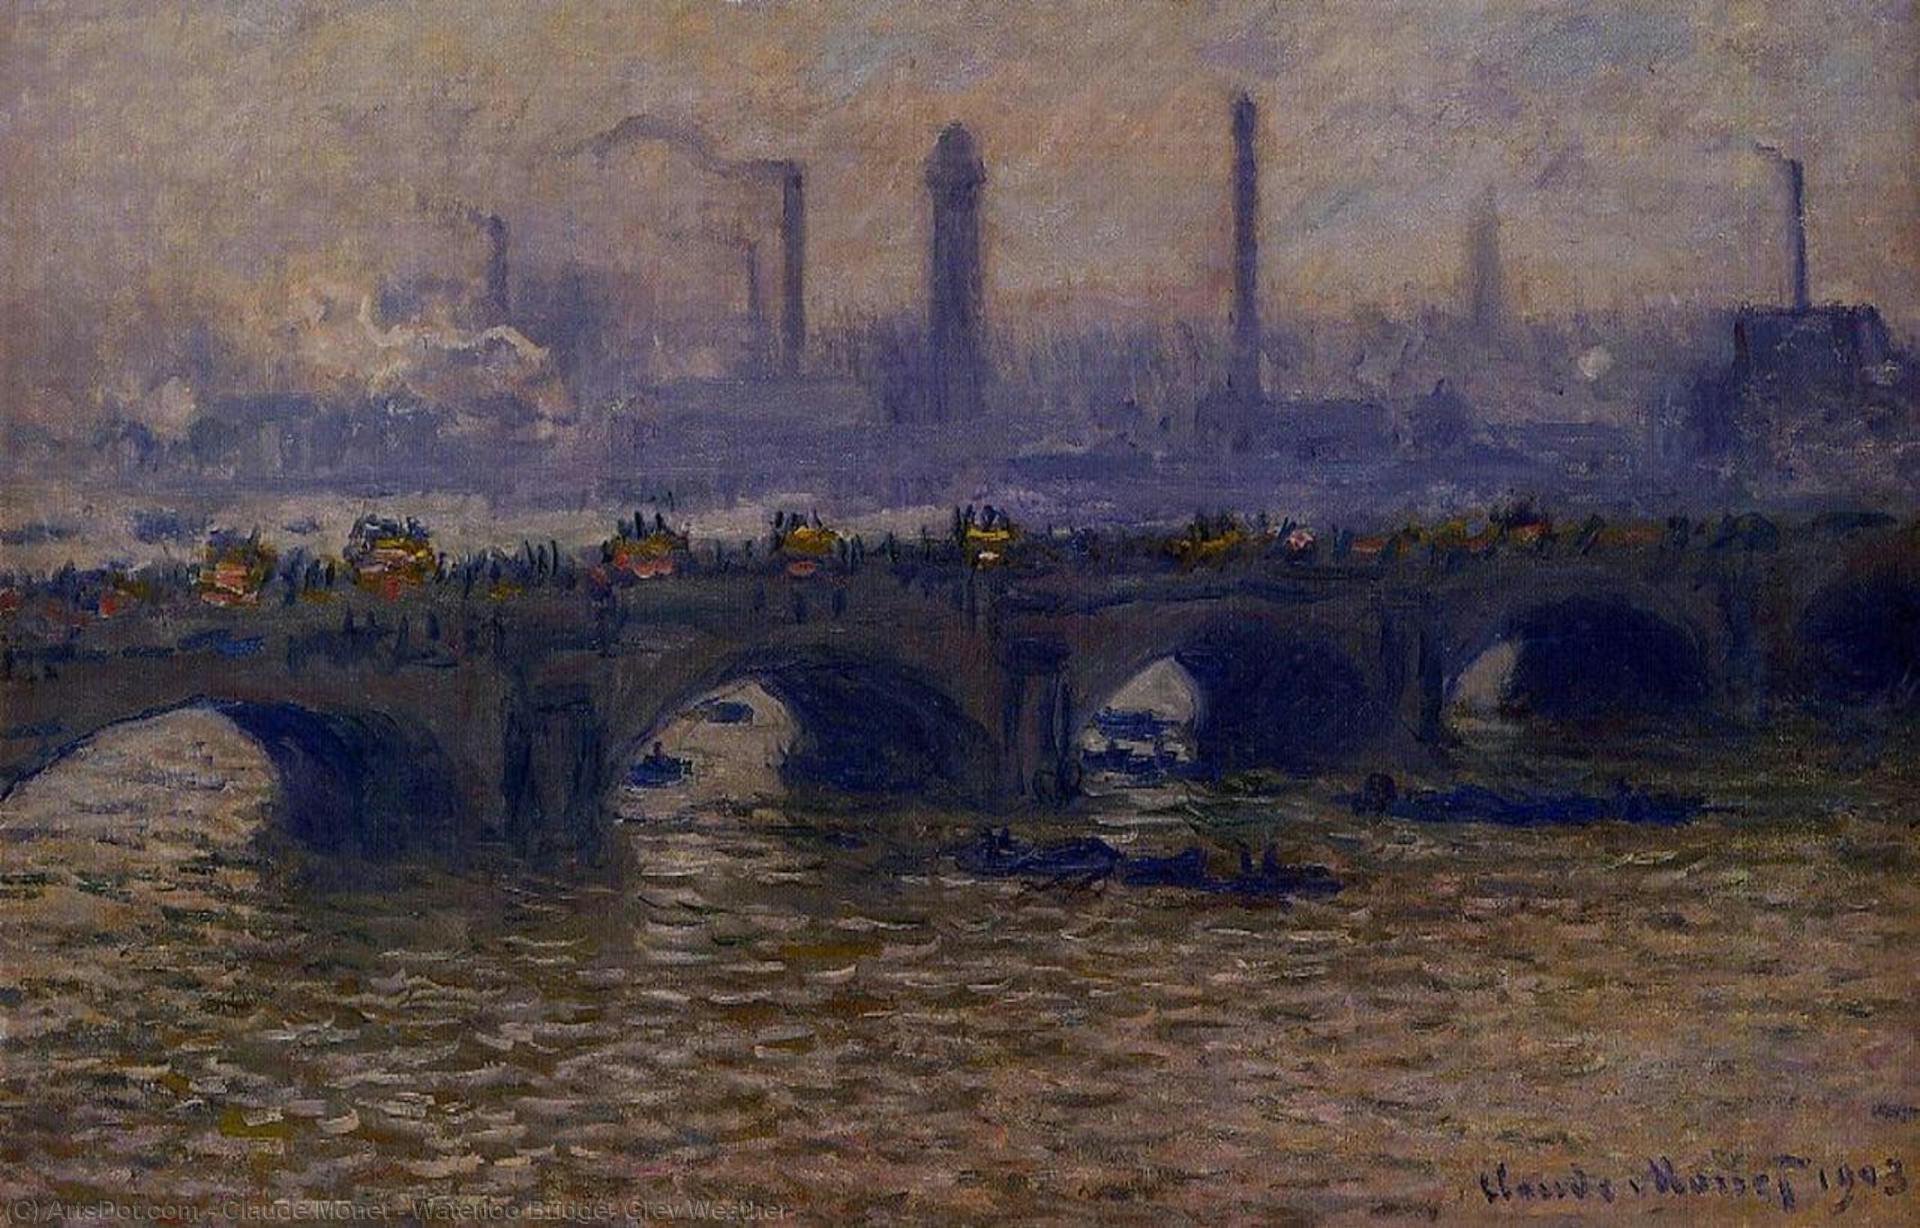 view of Waterloo Bridge, city’s industrial skyline smothered with synthetic purple emissions